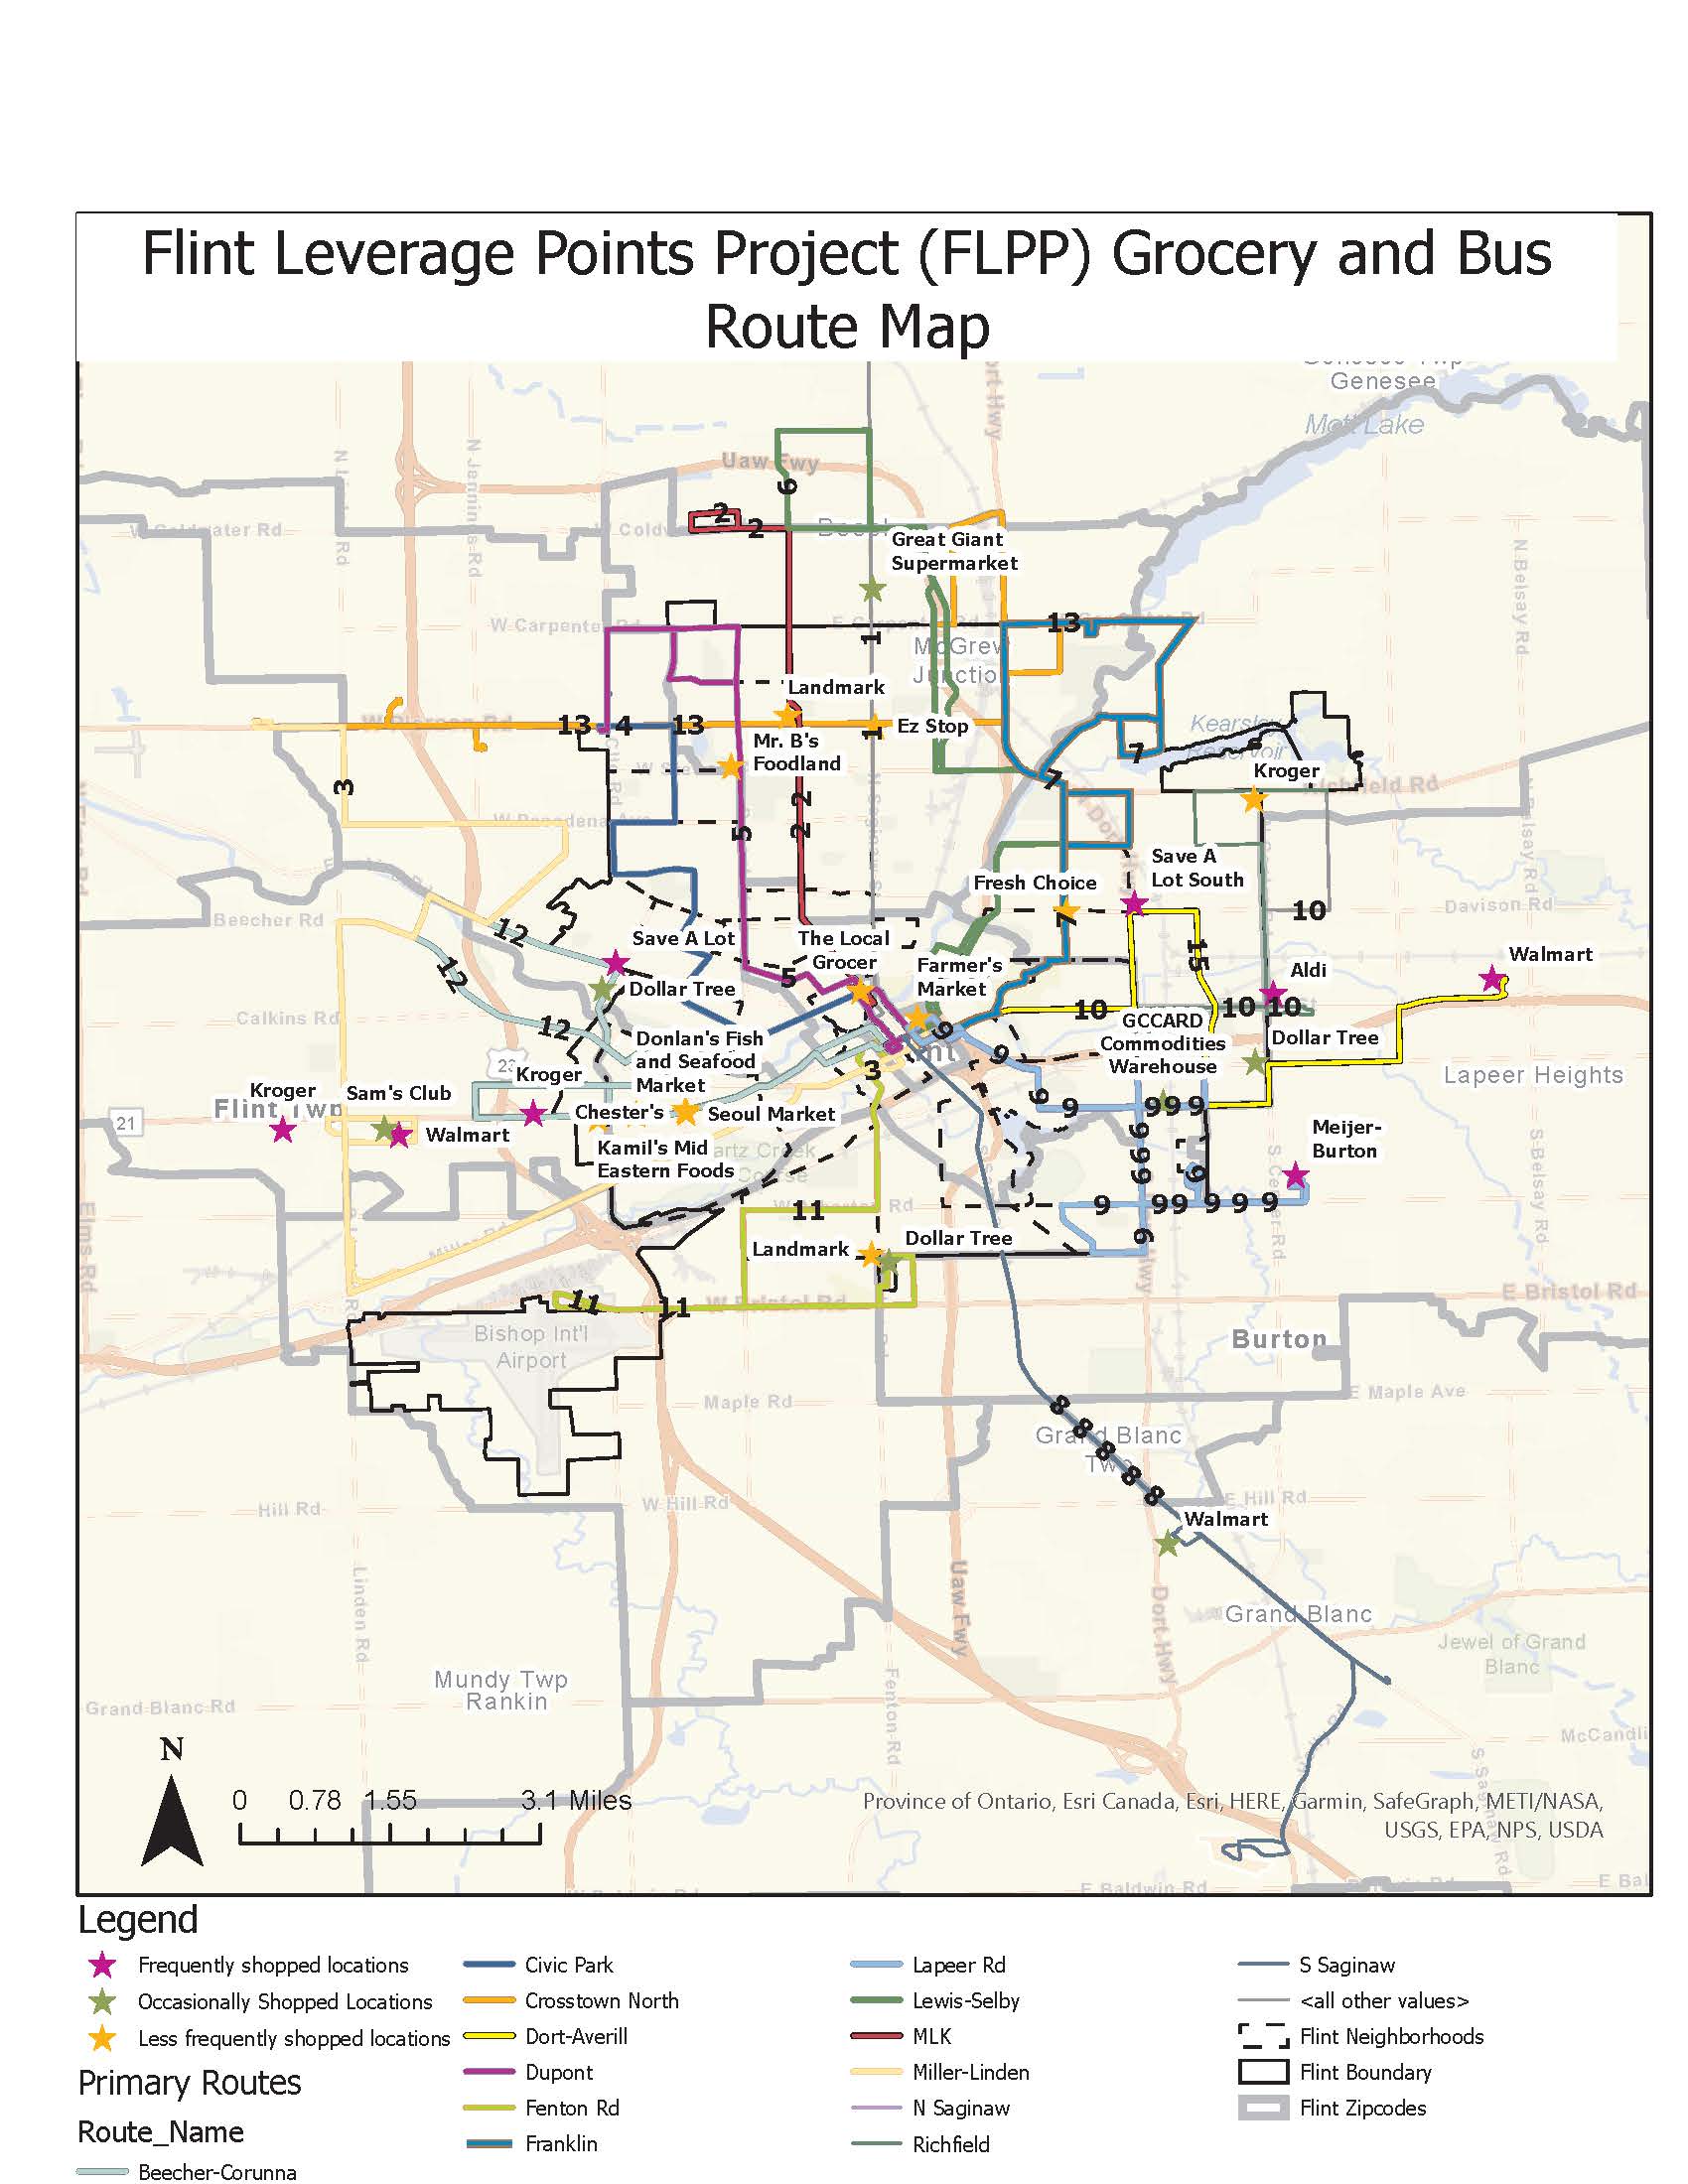 Primary MTA Flint Bus Routes with FLPP Grocery map